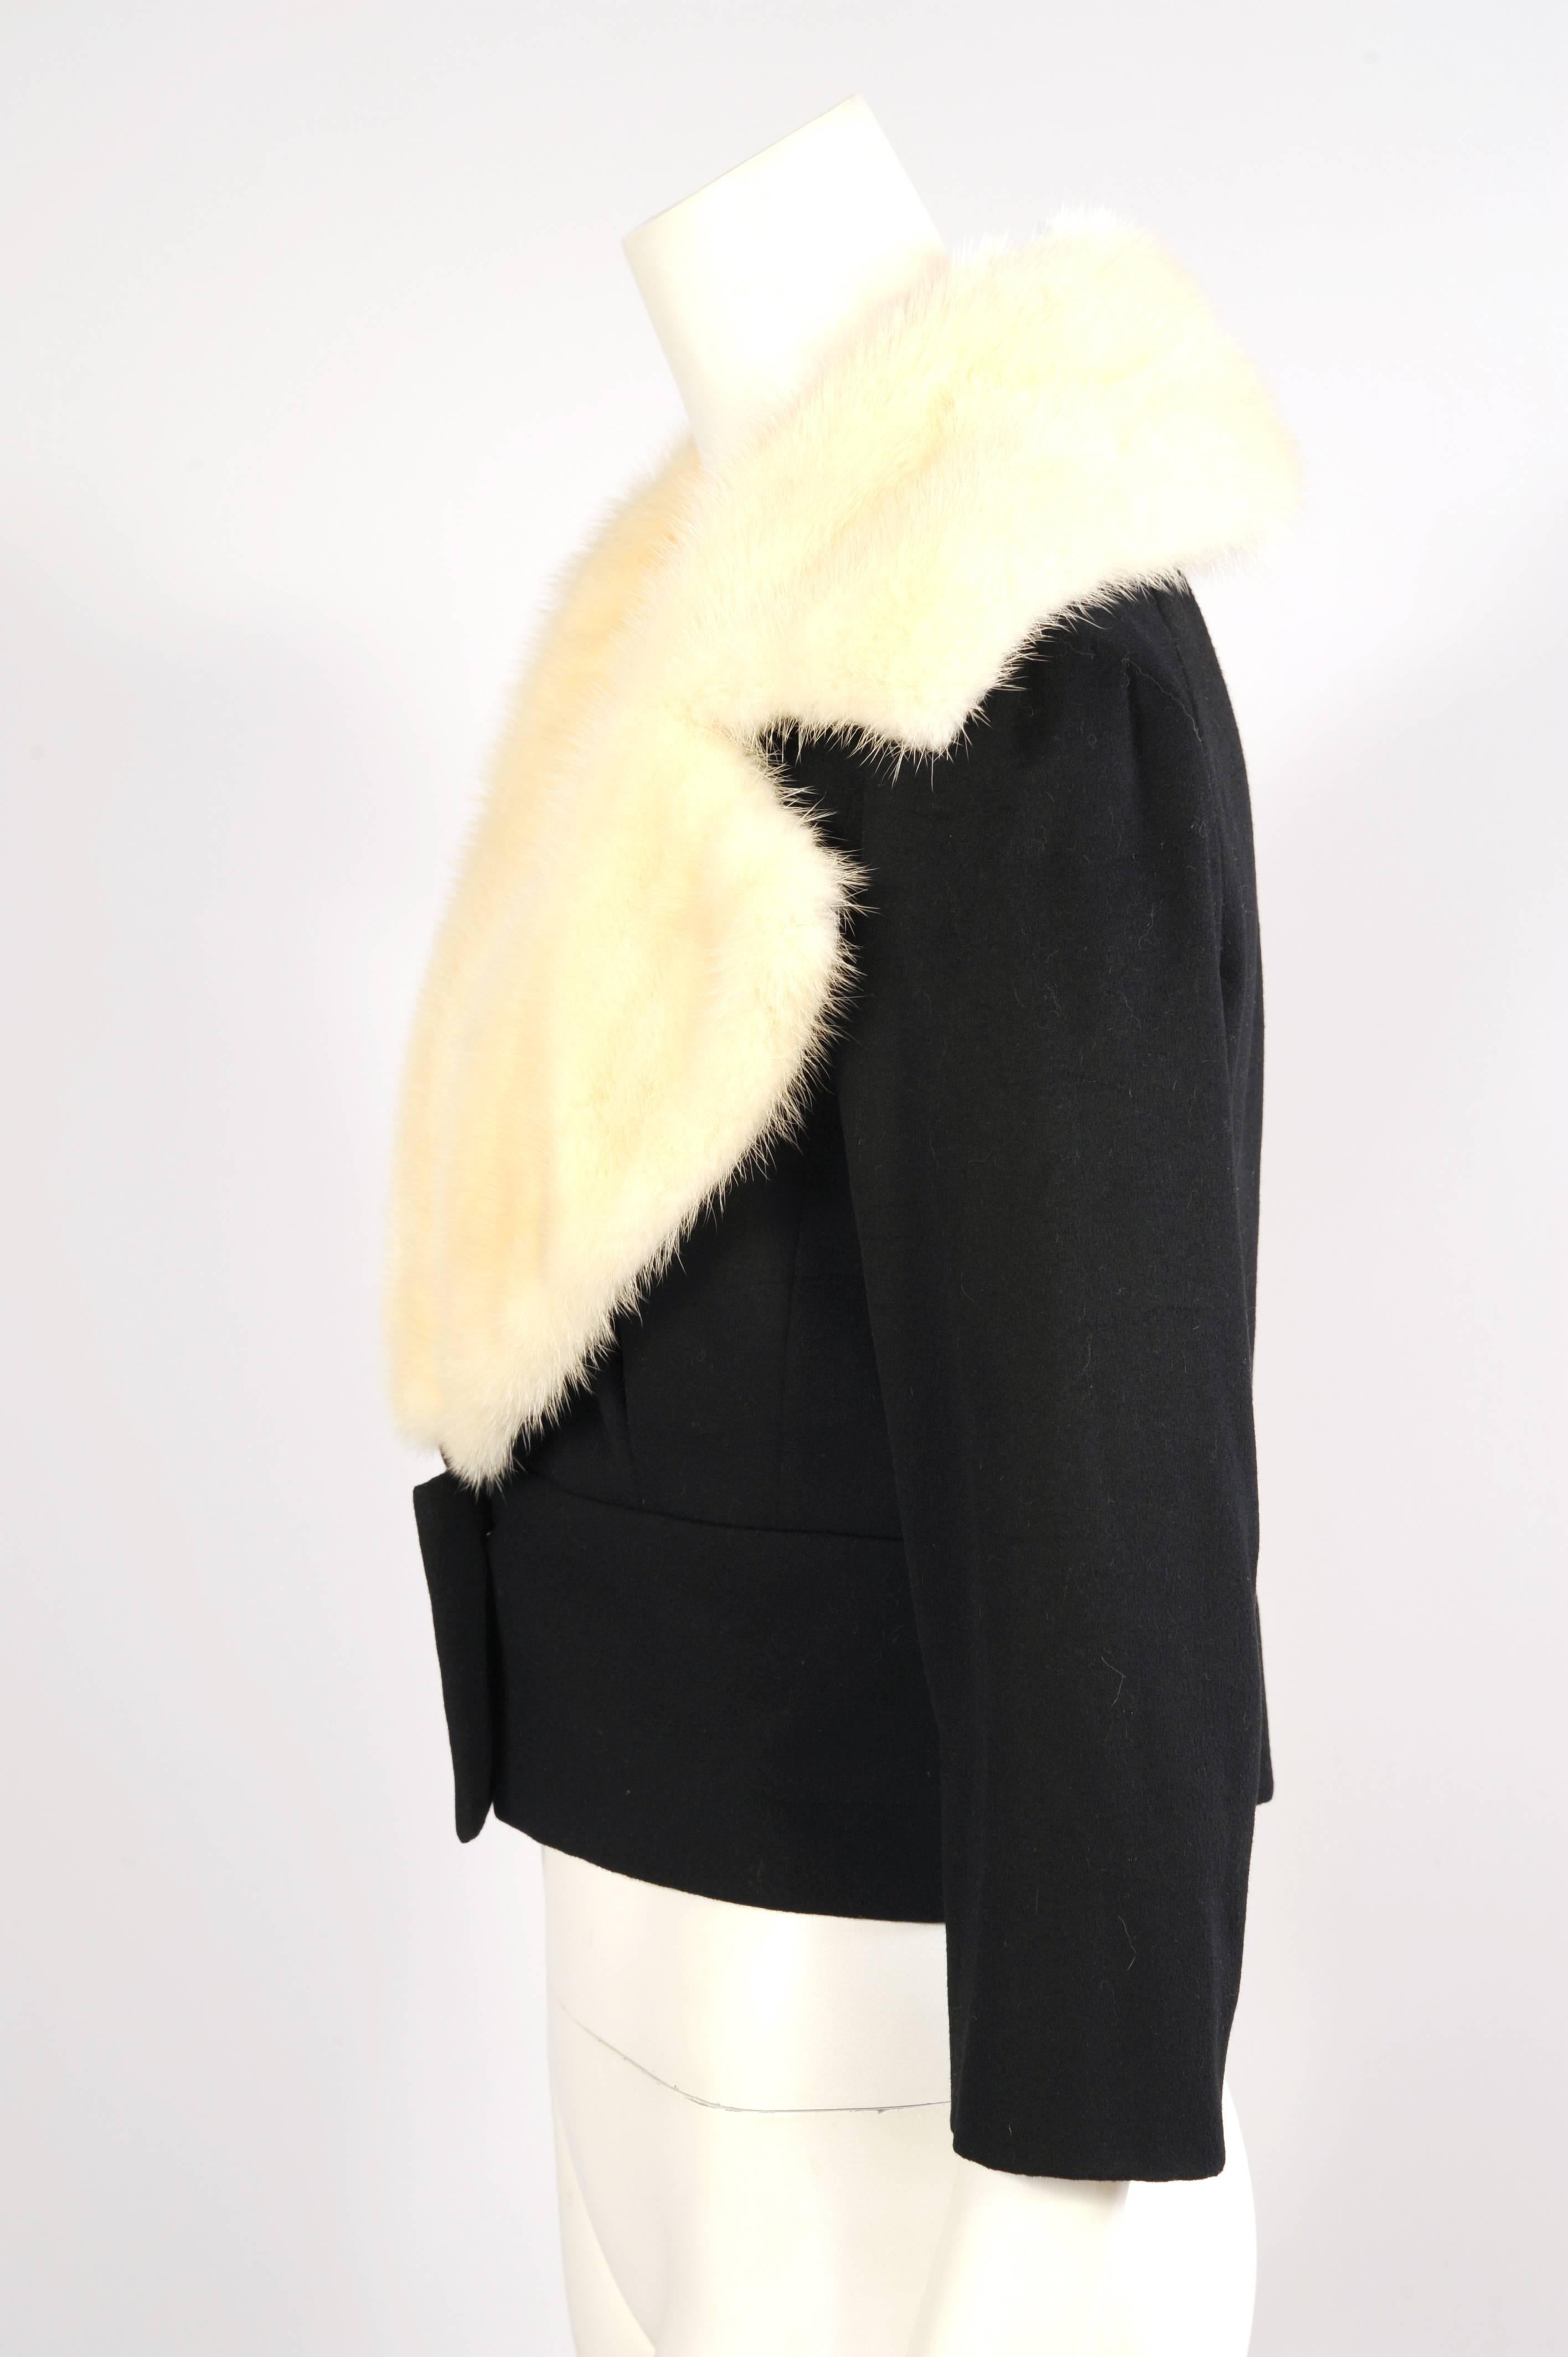 The softest black cashmere is combined with the most supple white mink in this numbered haute couture jacket from Jean Patou. The low cut neckline is wrapped with a generous white mink collar which tapers into a wide fitted waist band with two